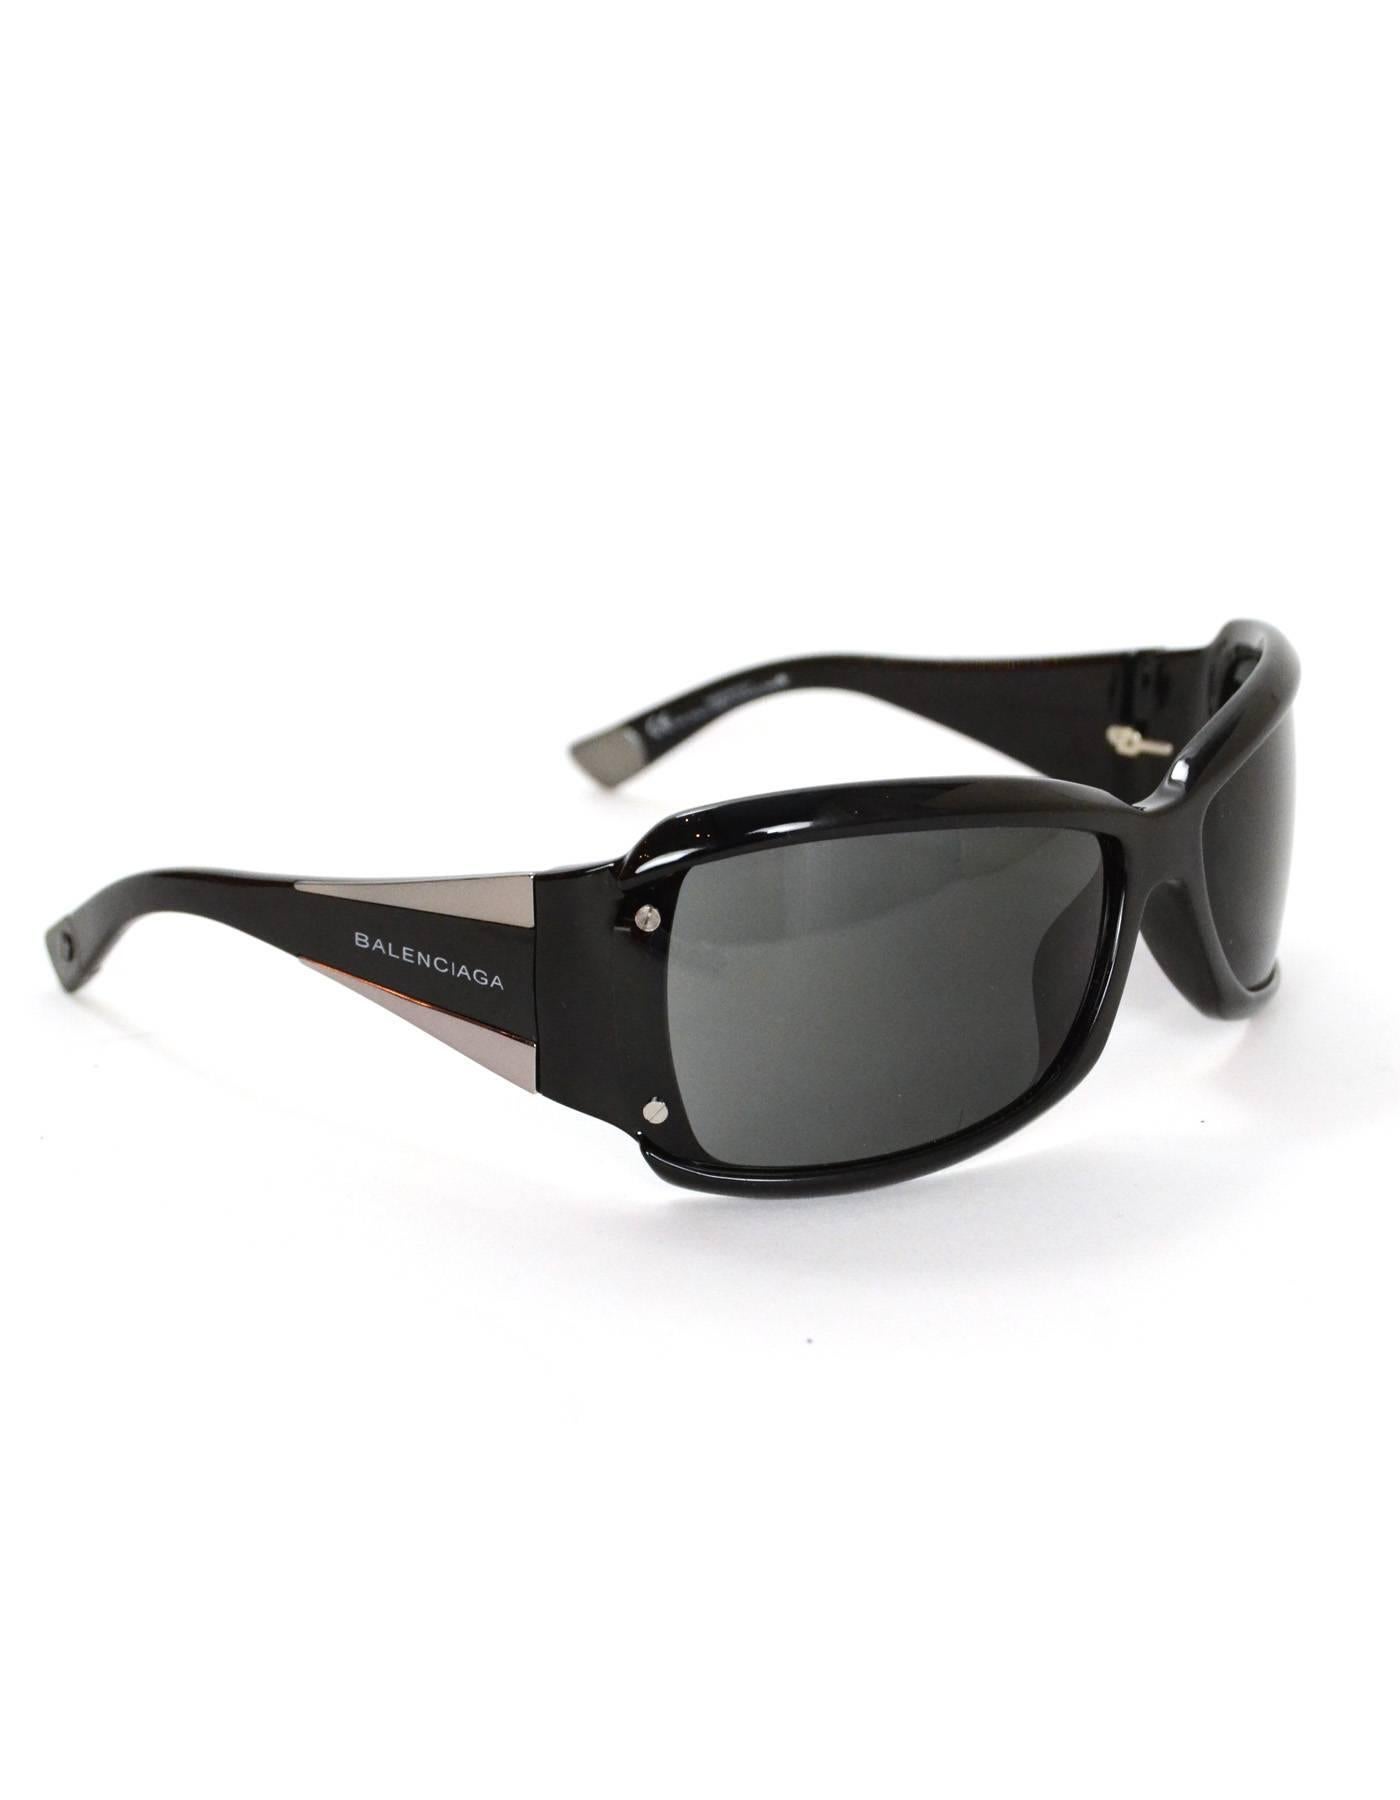 Balenciaga Black and Silvertone Sunglasses

Features logo at arms

Made In: Italy
Color: Black and silvertone
Materials: Resin and metal
Overall Condition: Excellent pre-owned condition with the exception of very light surface